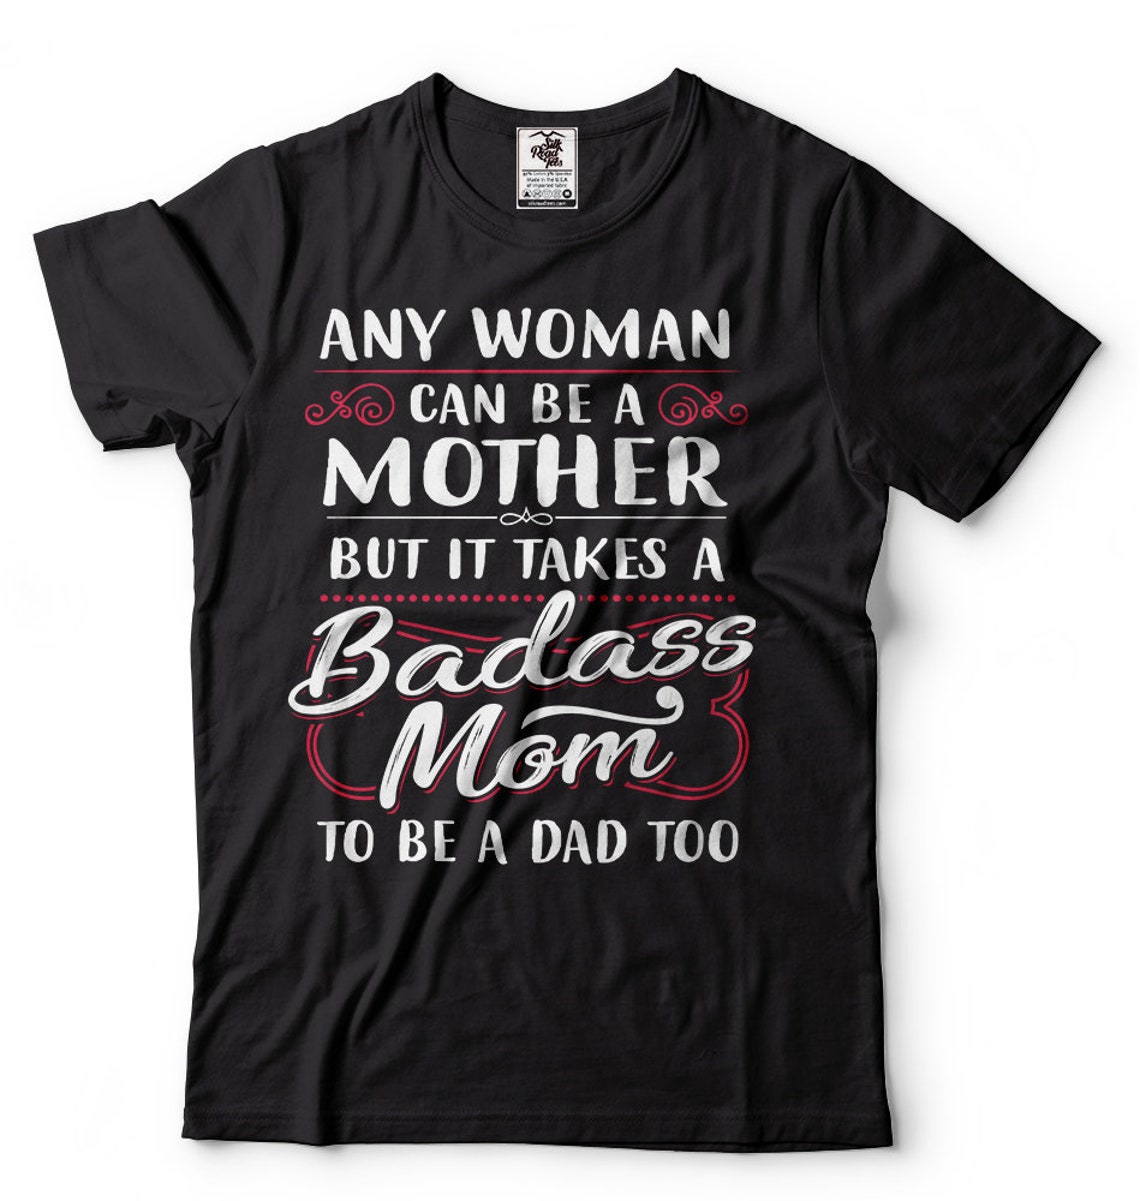 Single Mom Shirt funny father's day gift for mother Single parenthood shirt